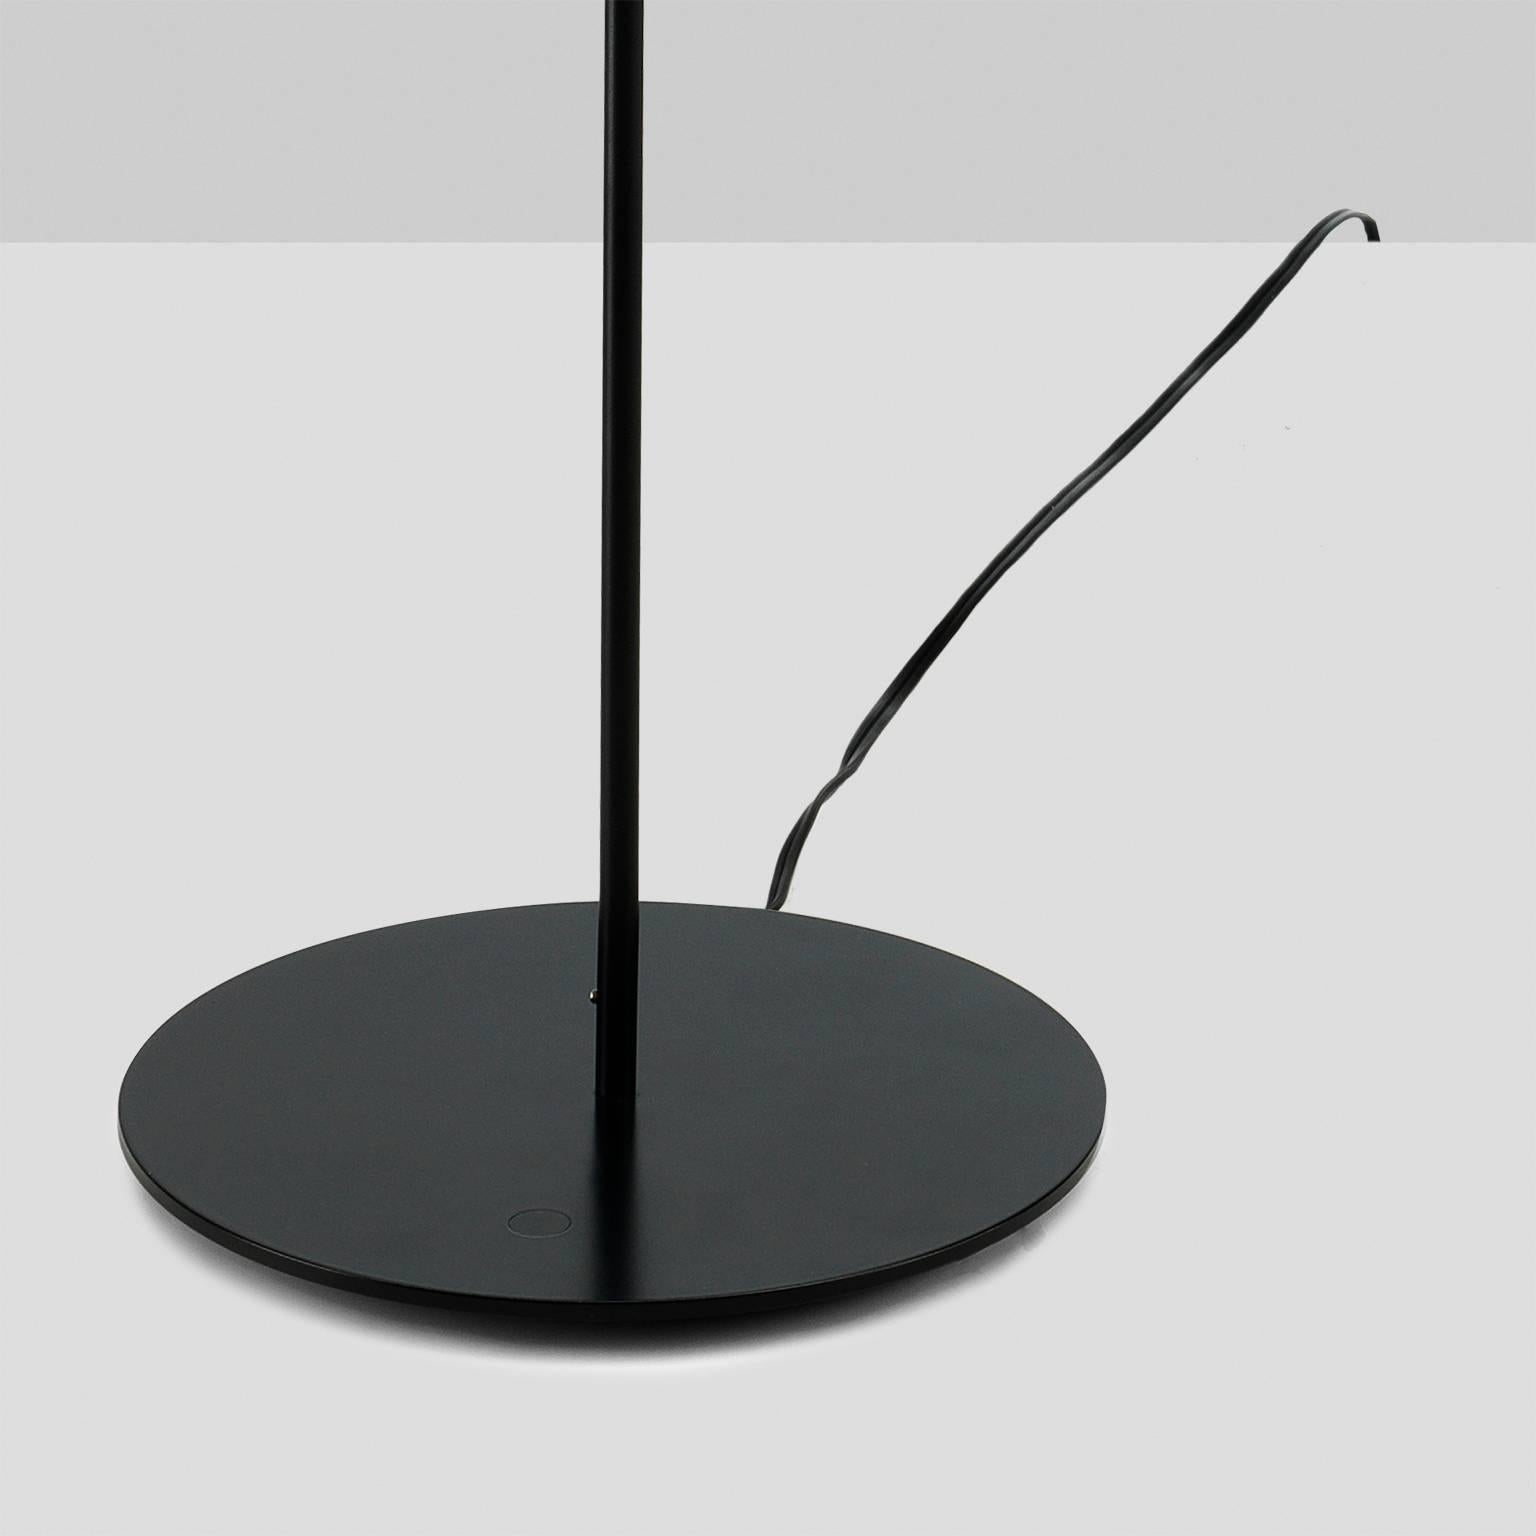 Composition Contemporary Minimalistic Carbon Light Floor Lamp by Tokio. For Sale